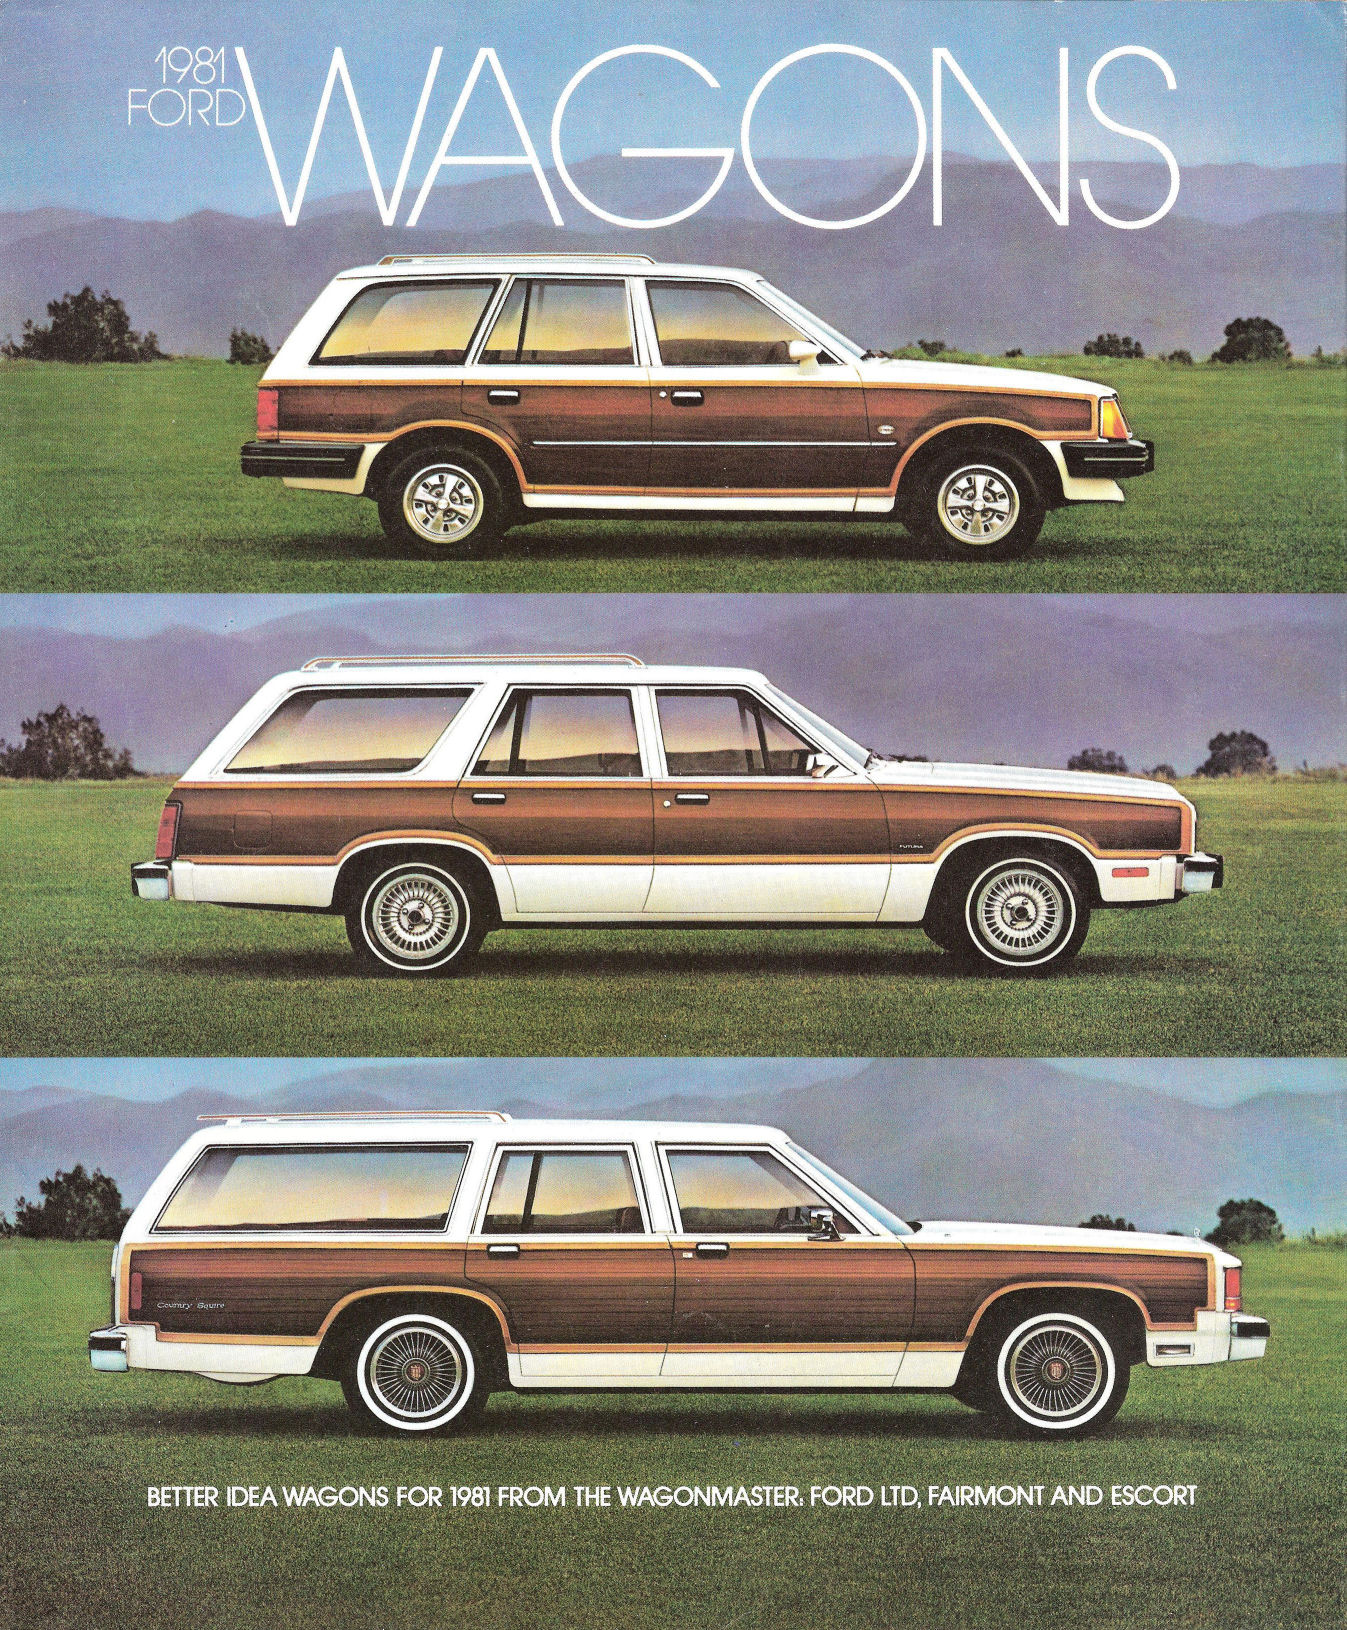 1981_Ford_Wagons_Foldout-01